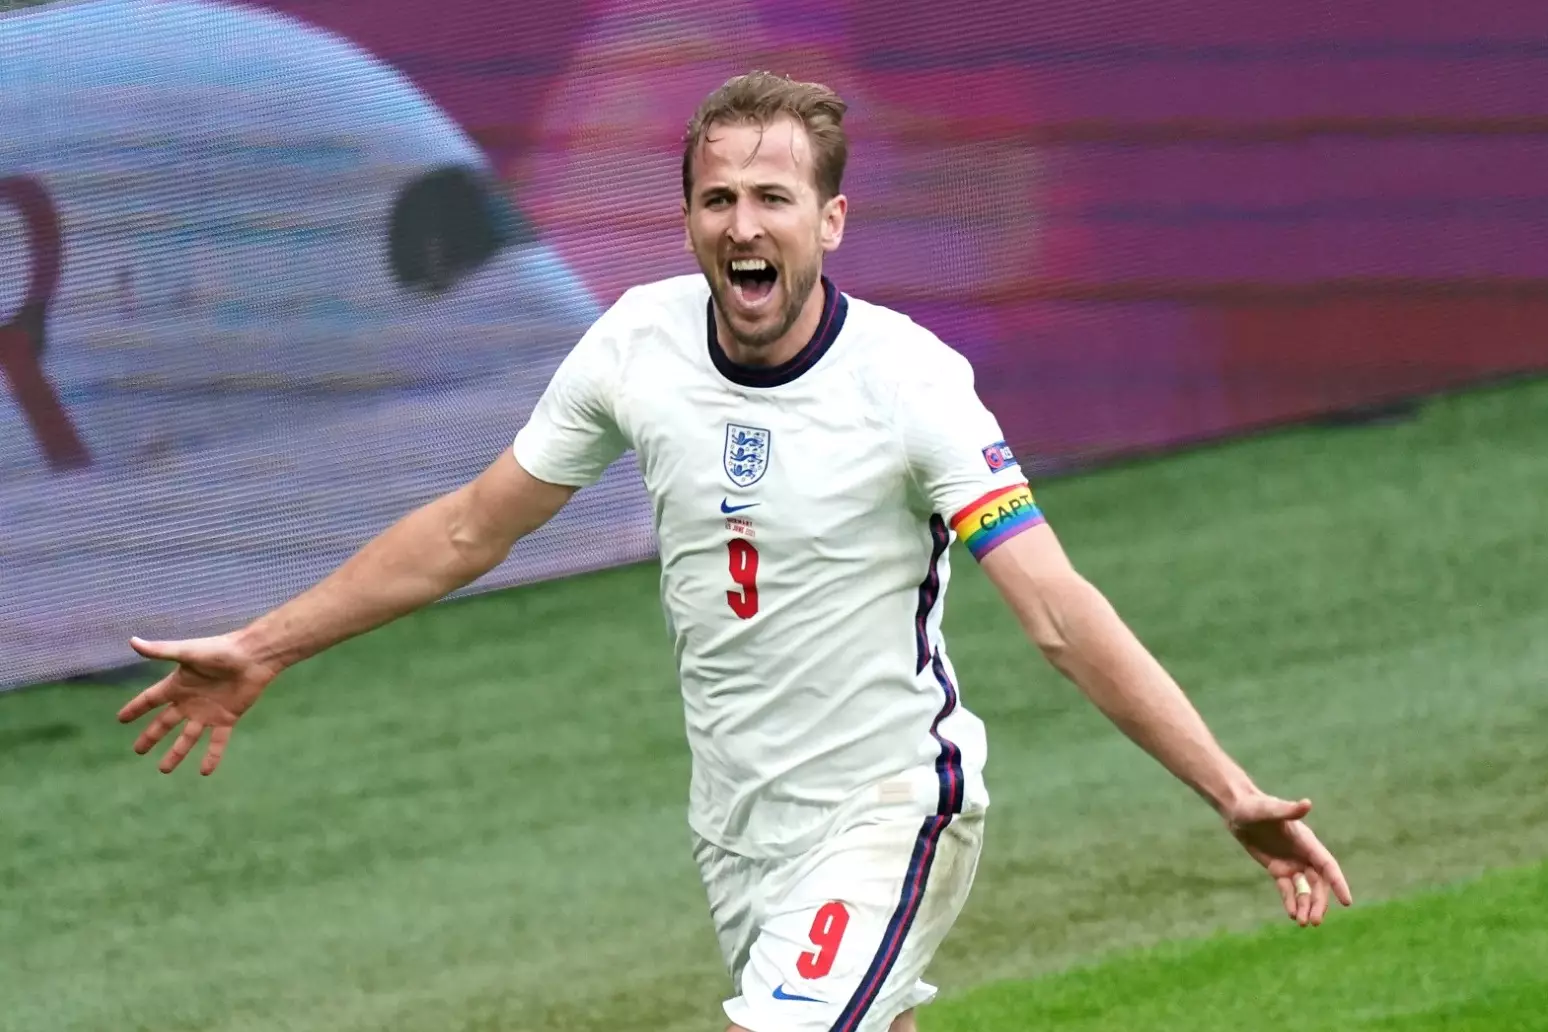 Harry Kane has scored four goals in his past three matches after looking below his best in England's group matches (